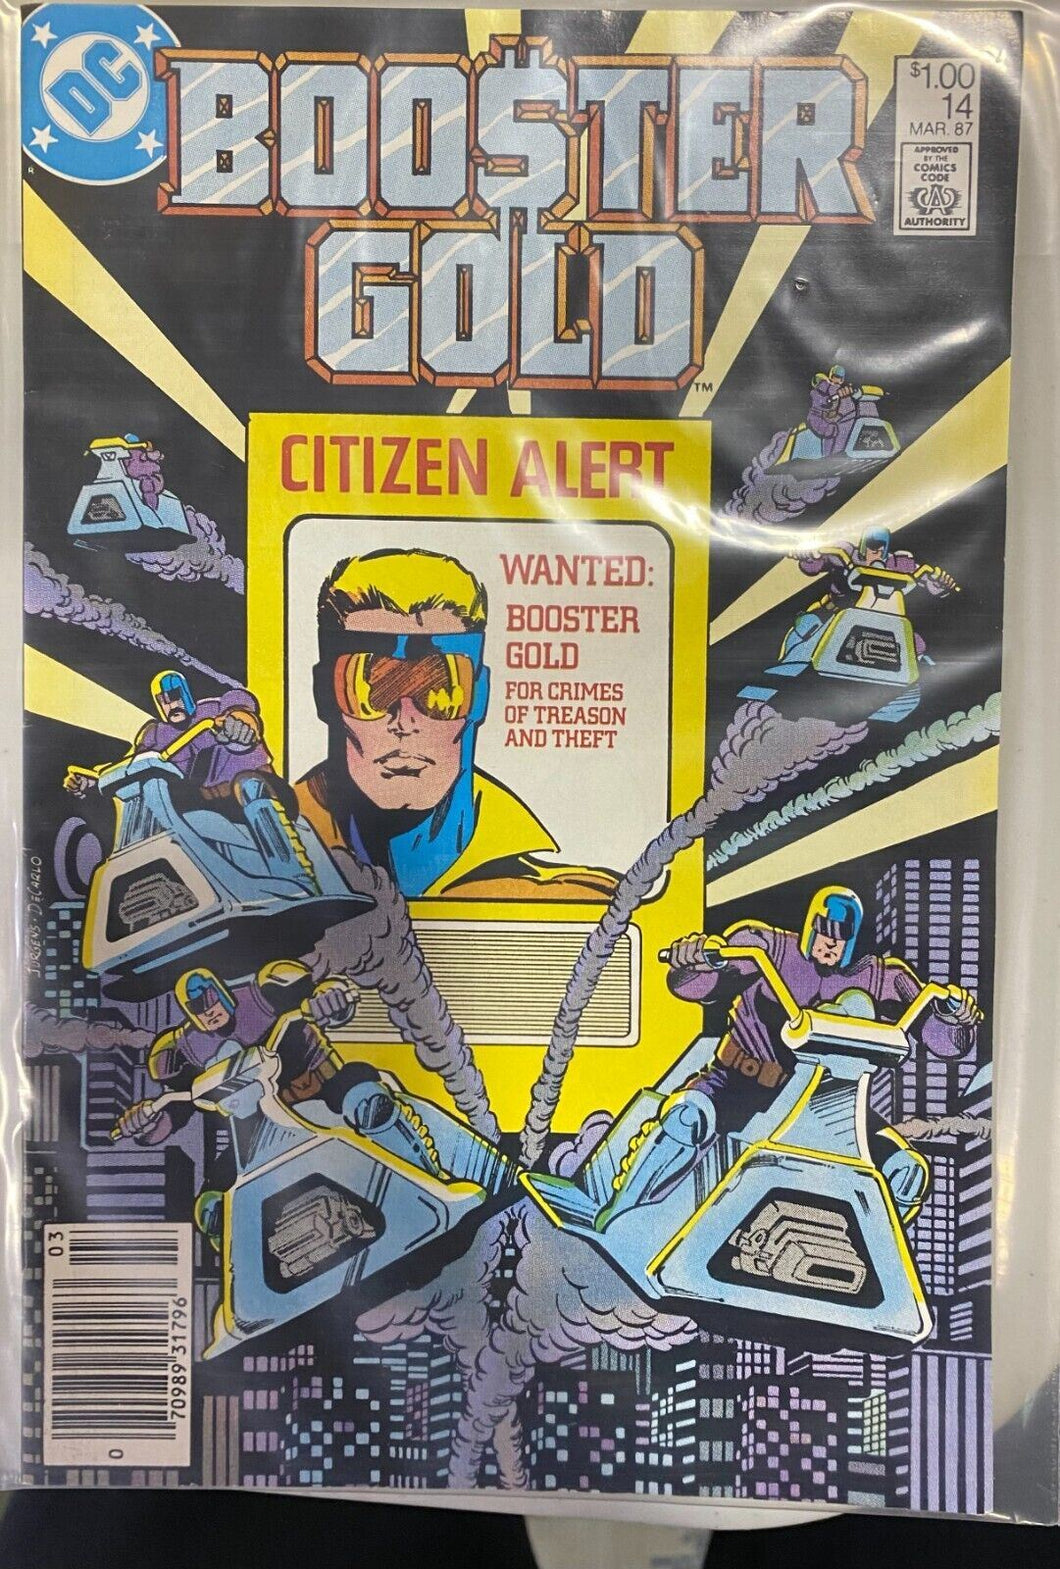 1987 DC Comics Booster Gold Issue 14